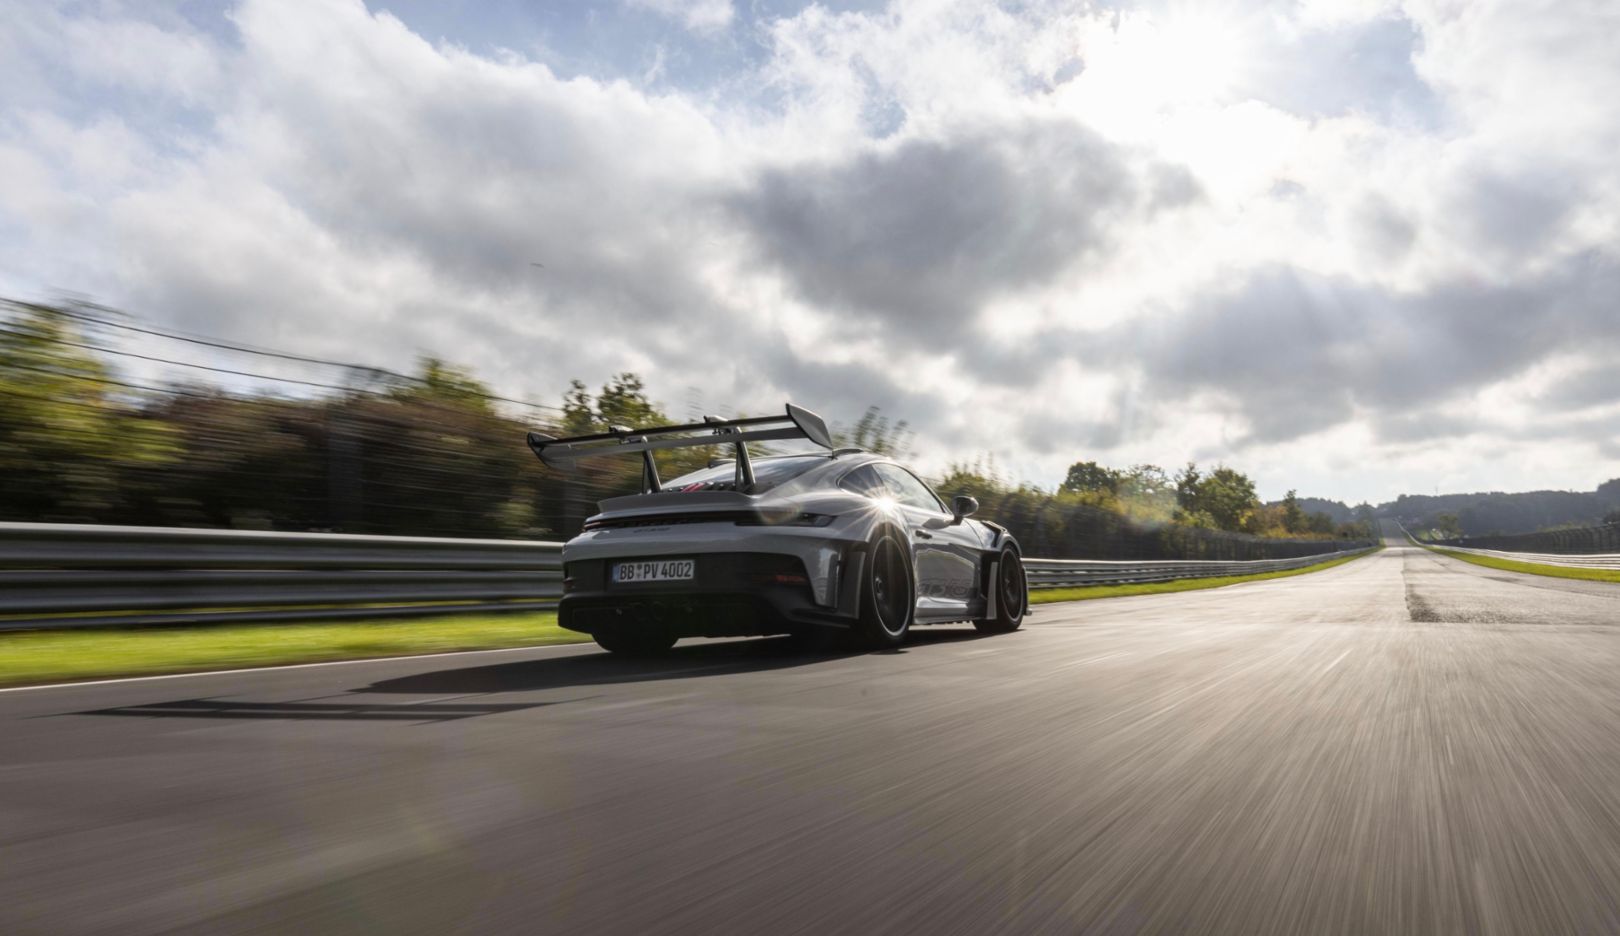 Porsche 911 GT3 RS completes the ‘Ring in 6:49.328 minutes